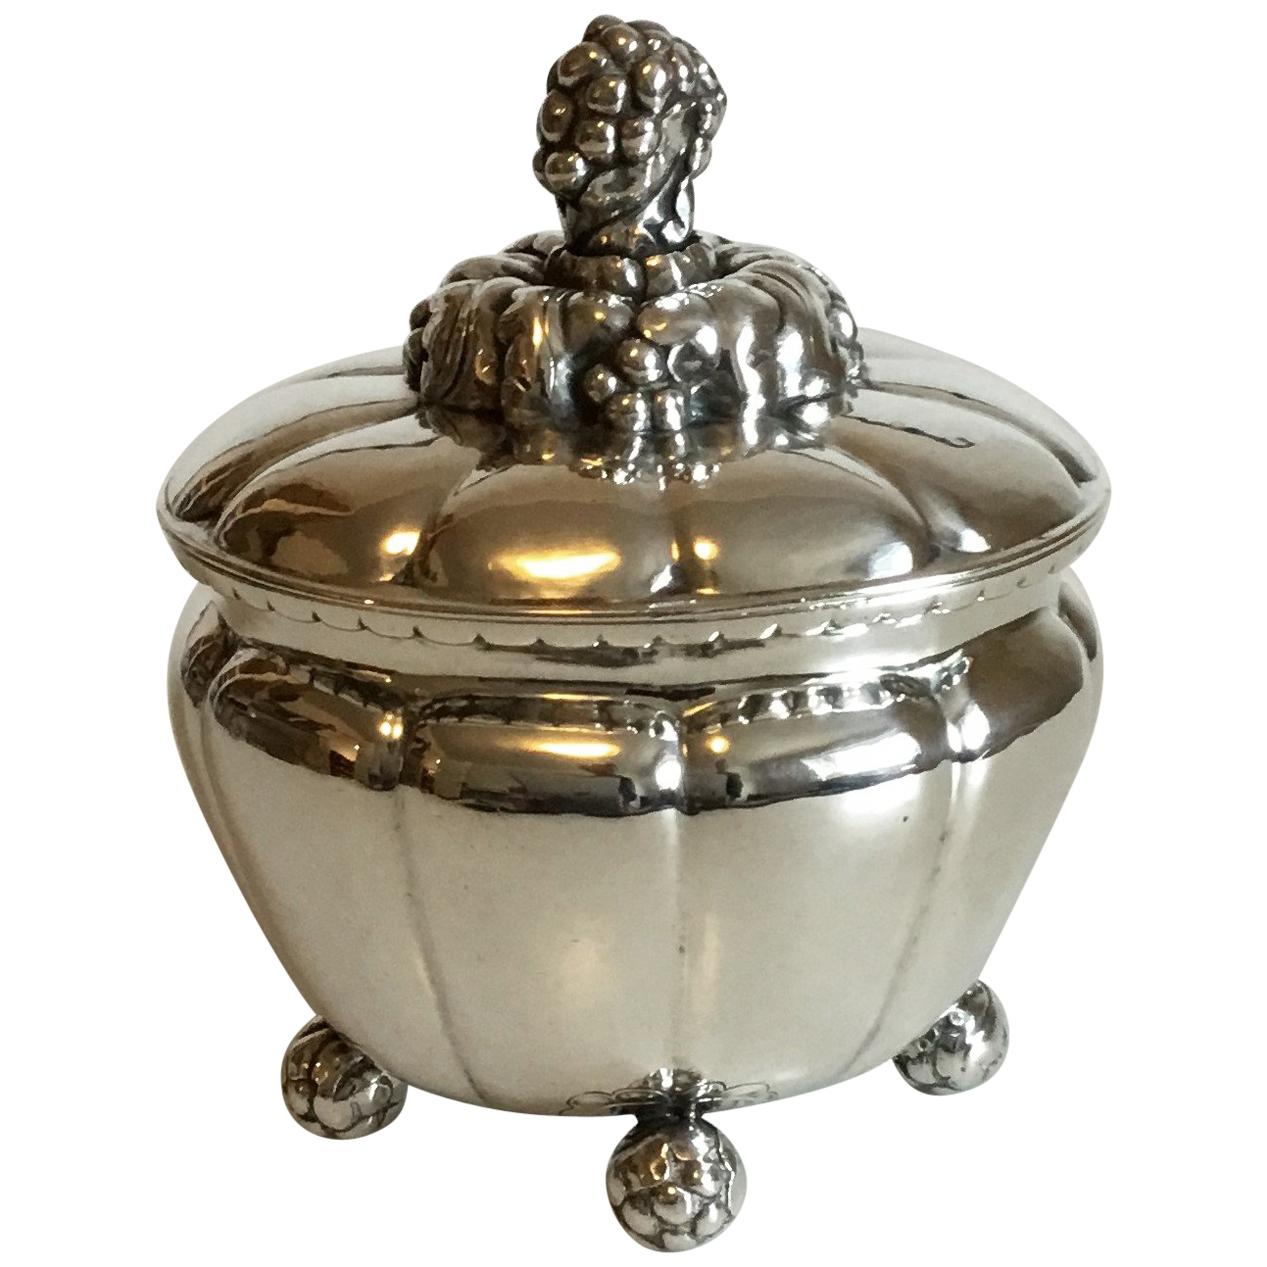 Georg Jensen Silver 830 Bonbonniere No 72 with Swedish Import Marks from 1918 For Sale